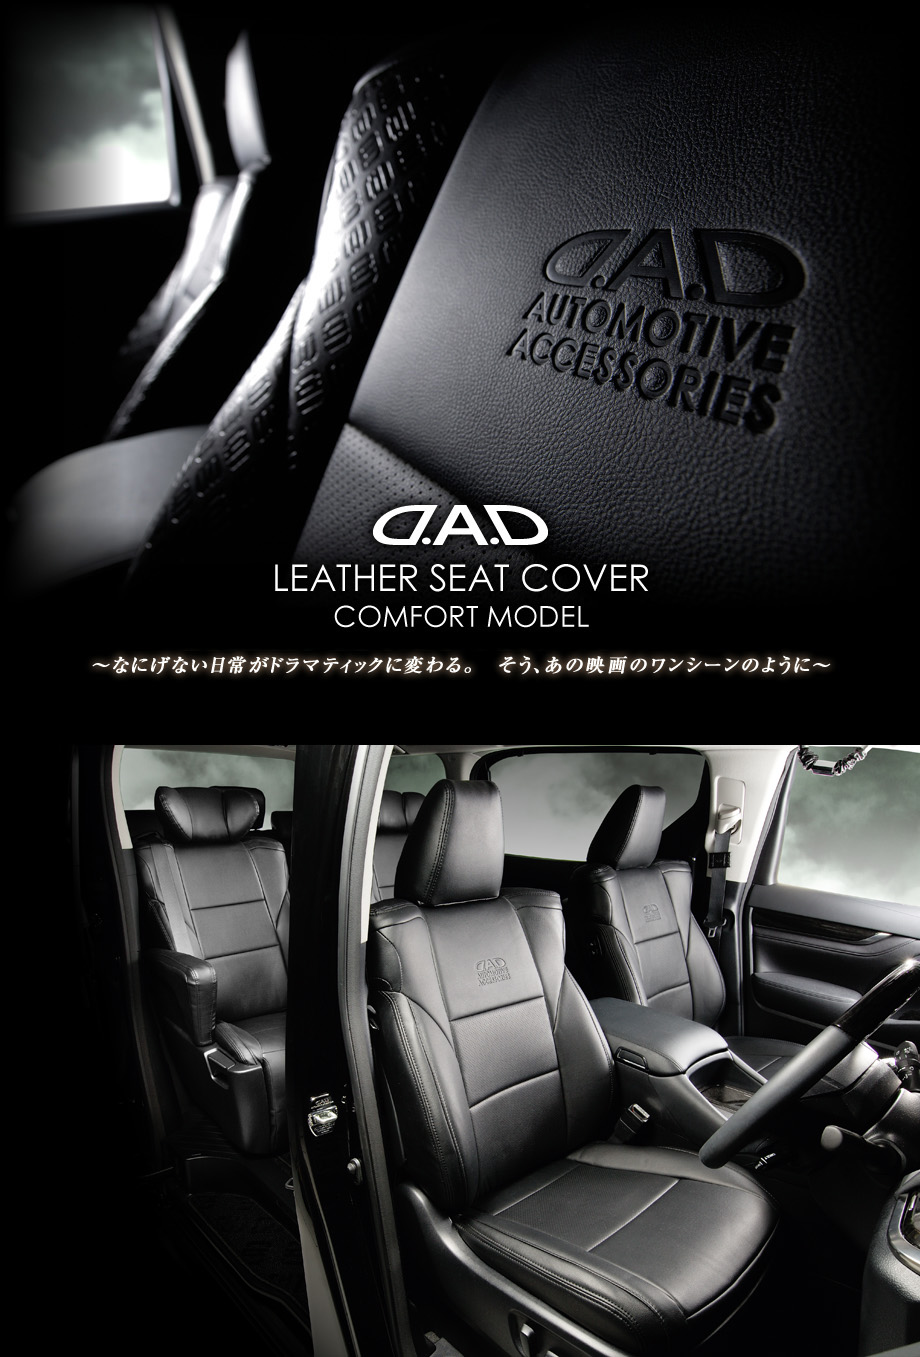 D.A.D LEATHER SEAT COVER COMFORT MODEL